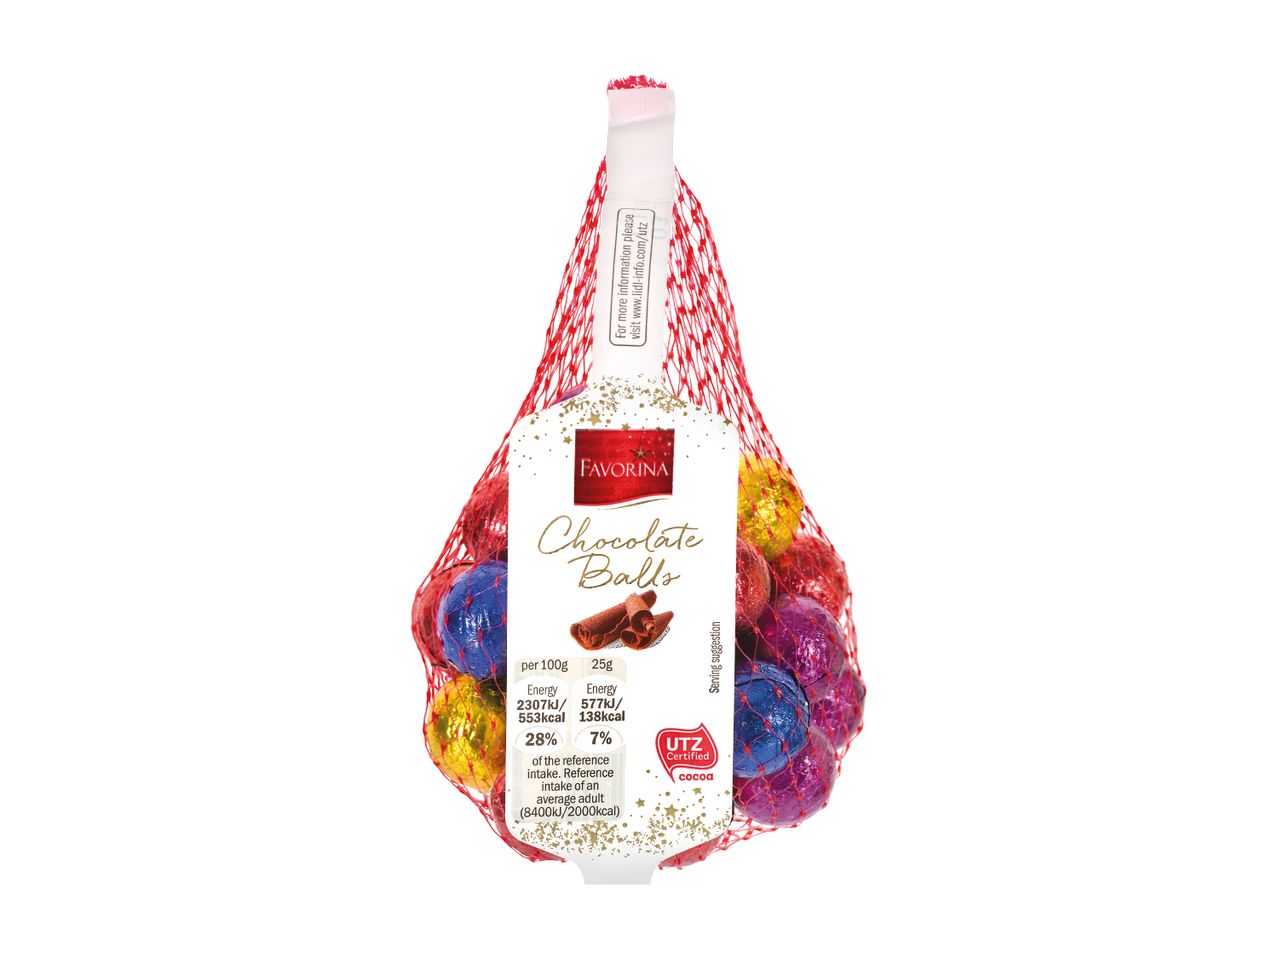 Go to full screen view: Favorina Whole Milk Chocolate Balls - Image 1